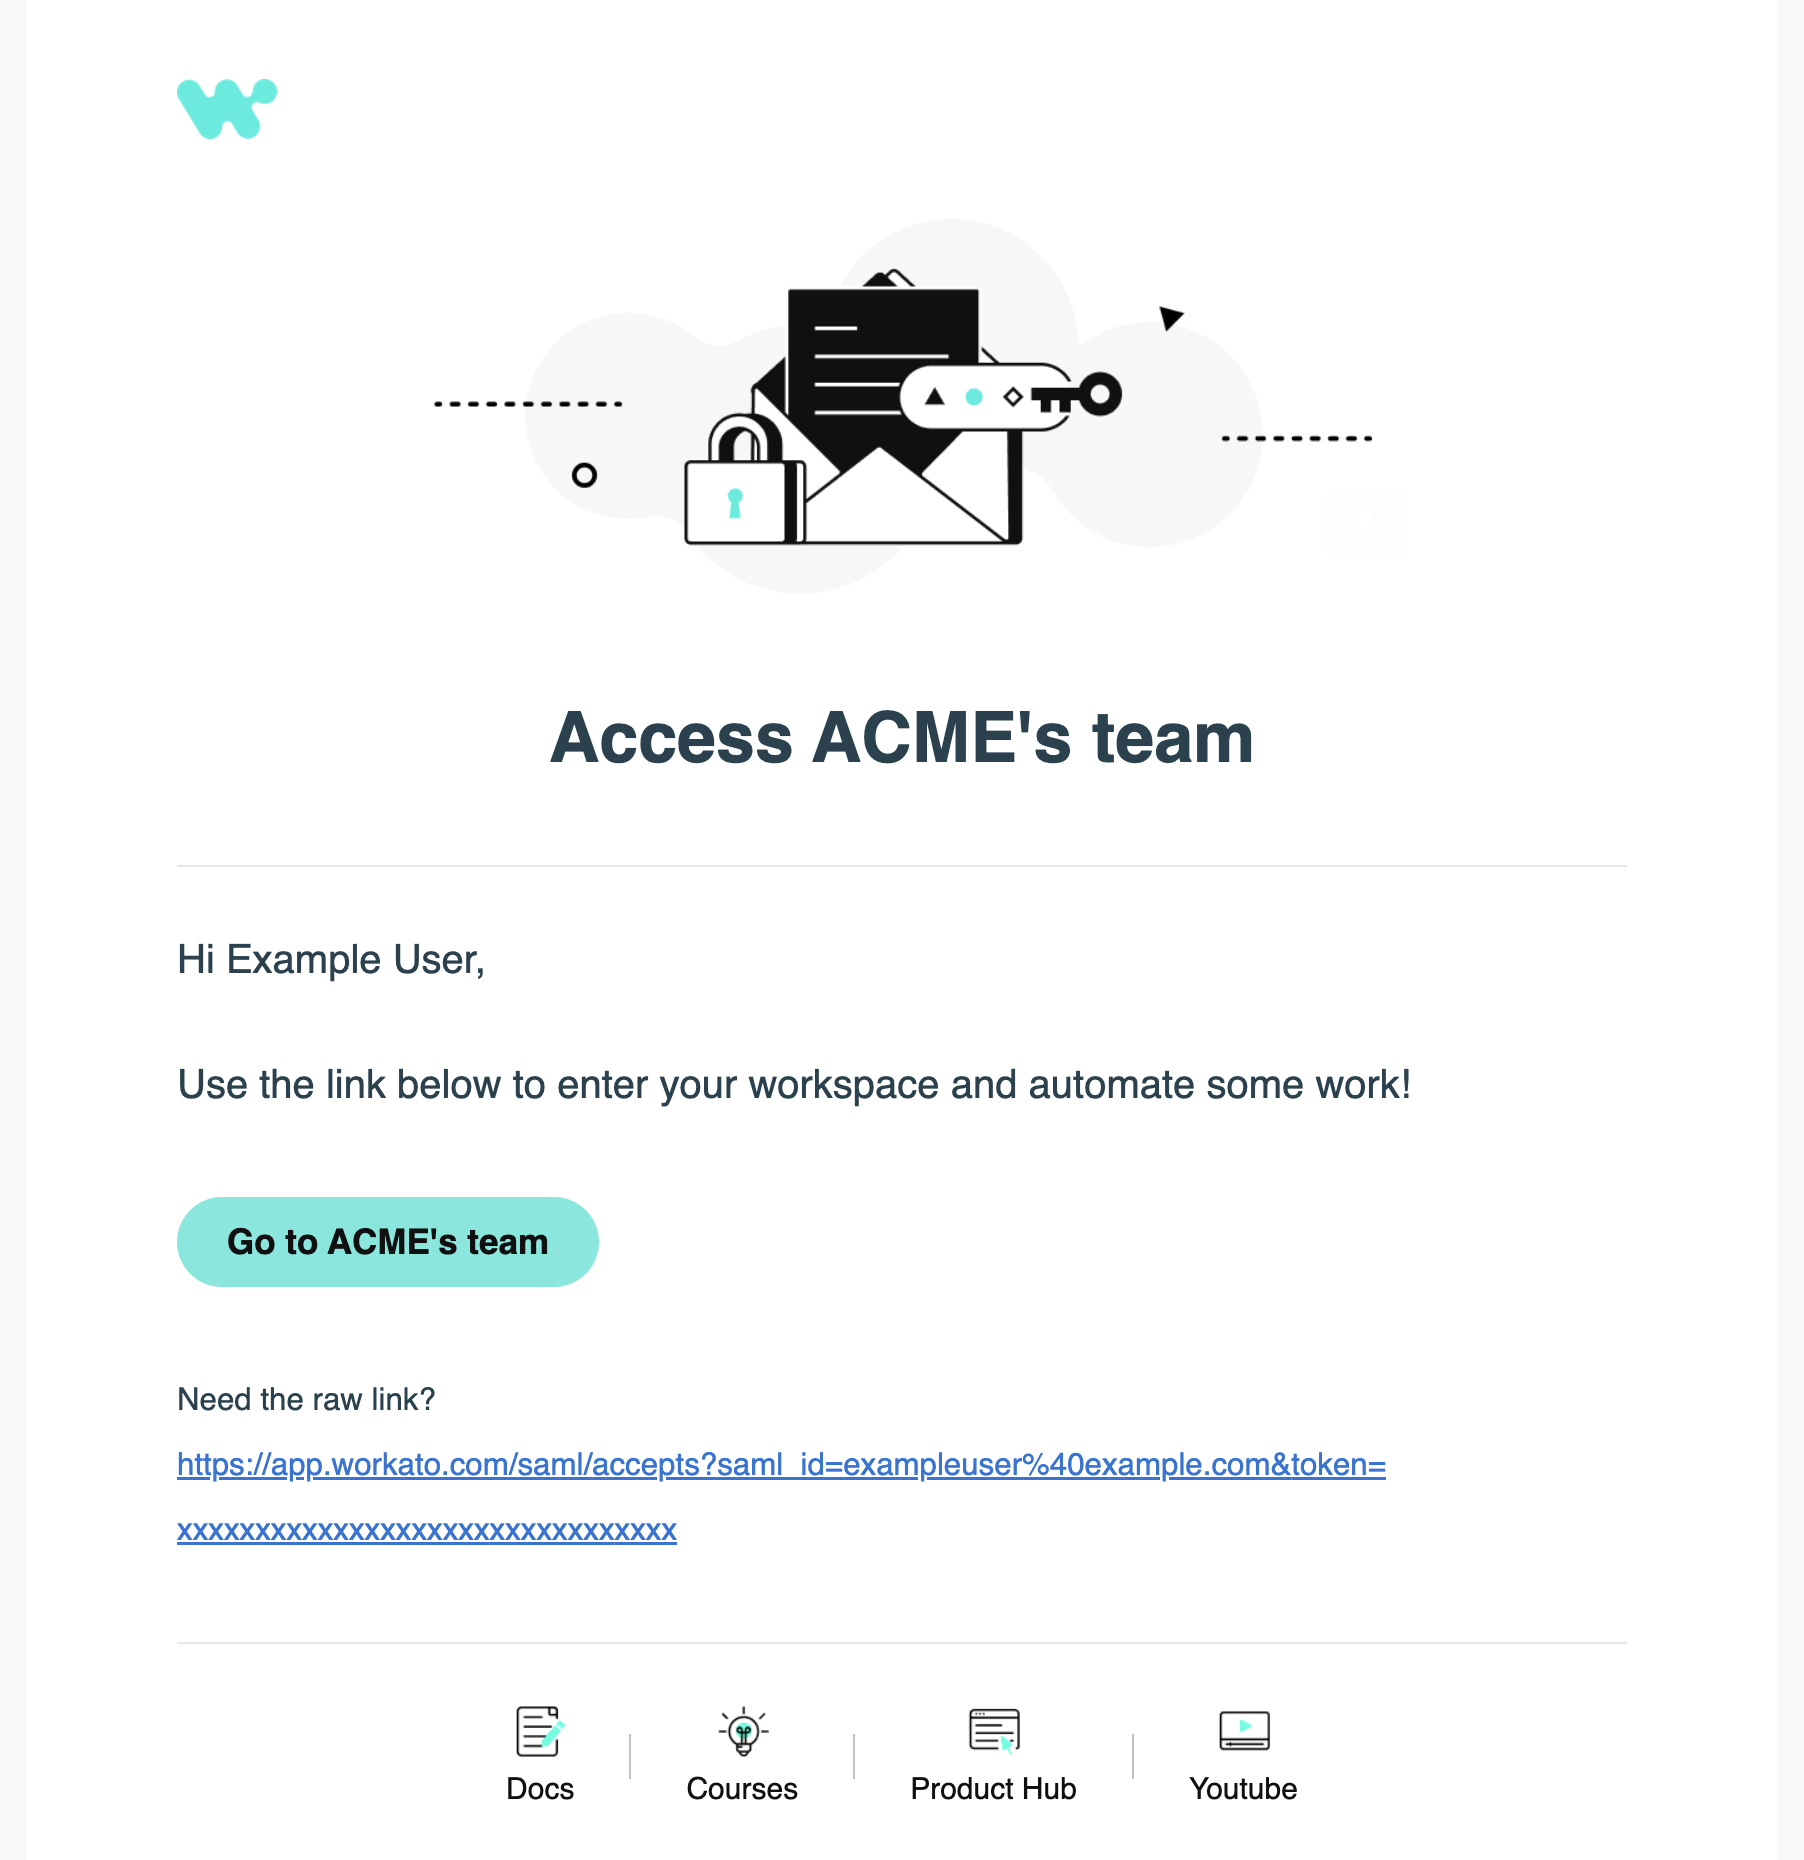 Email invitation to join a workspace